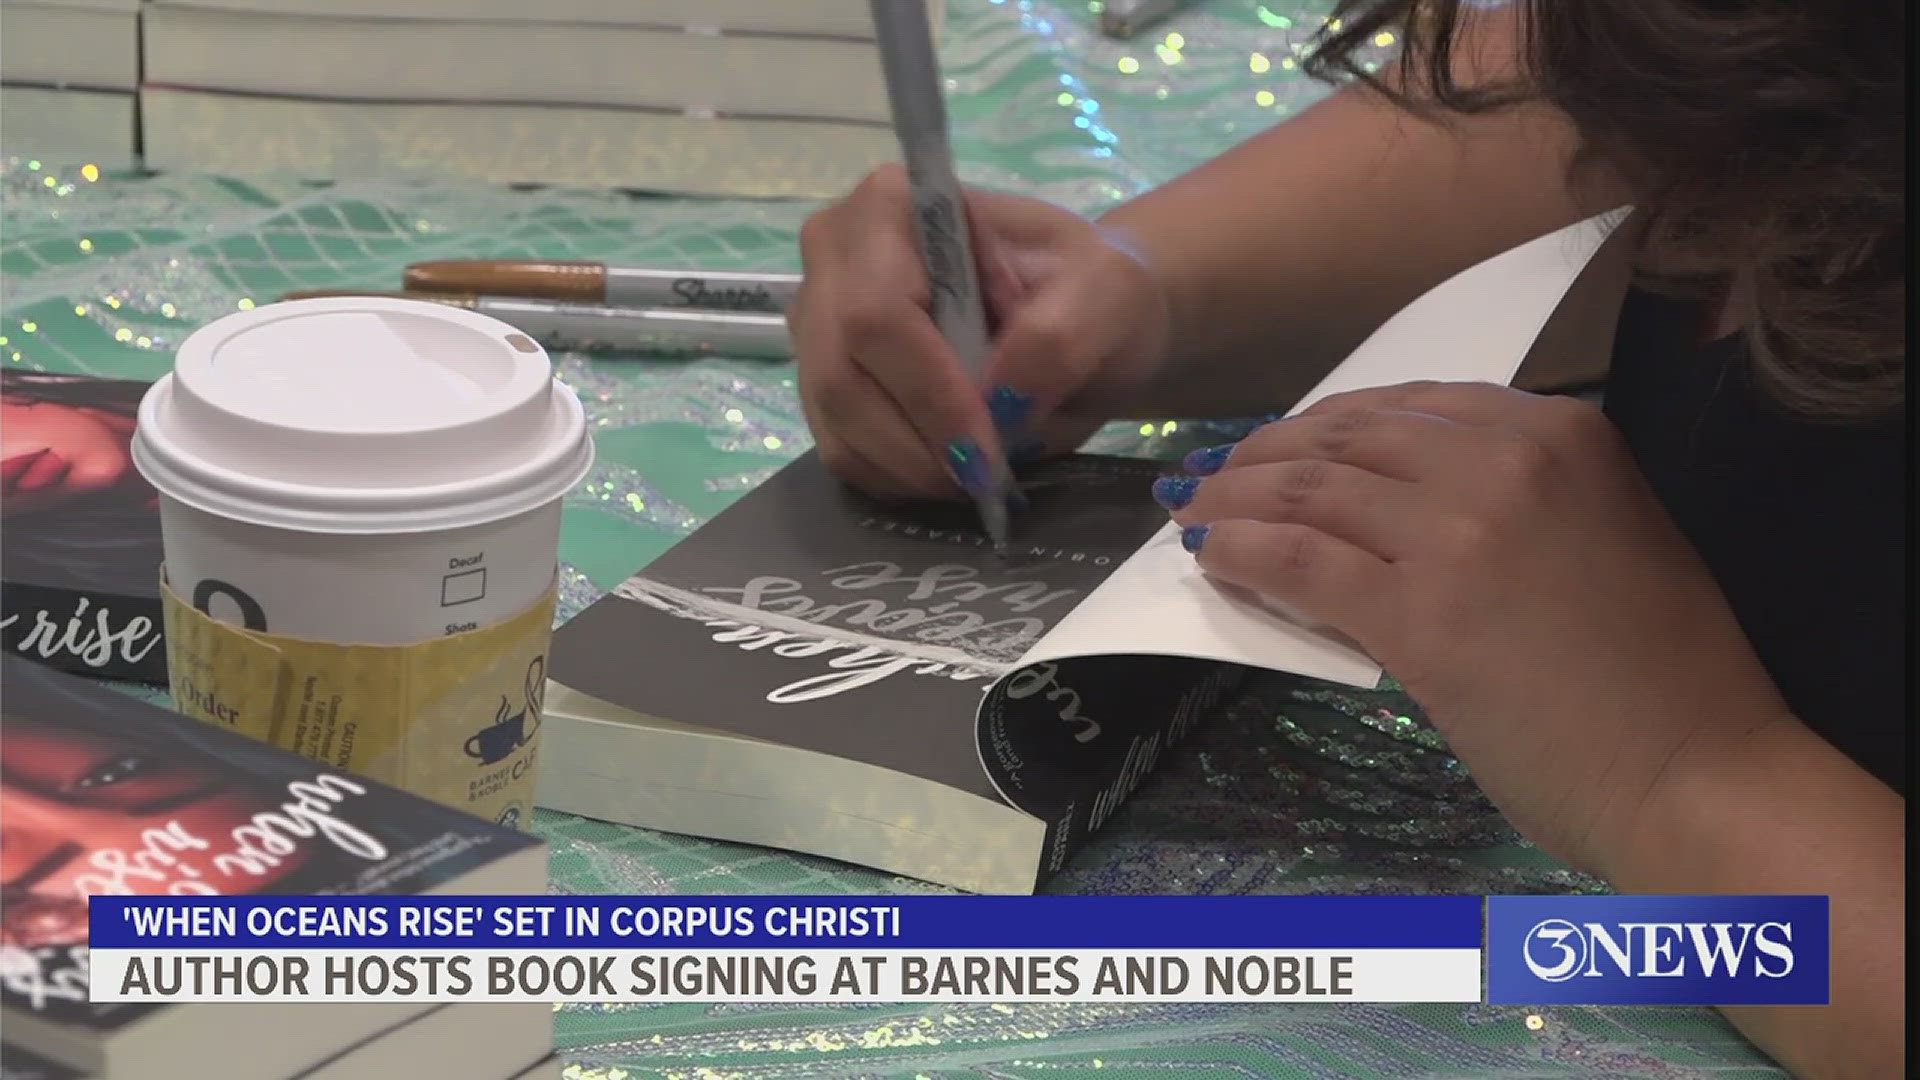 'When Oceans Rise' is a fairytale retelling that is set in Corpus Christi. Author Robin Alvarez will sign copies of the book at Barnes and Noble.